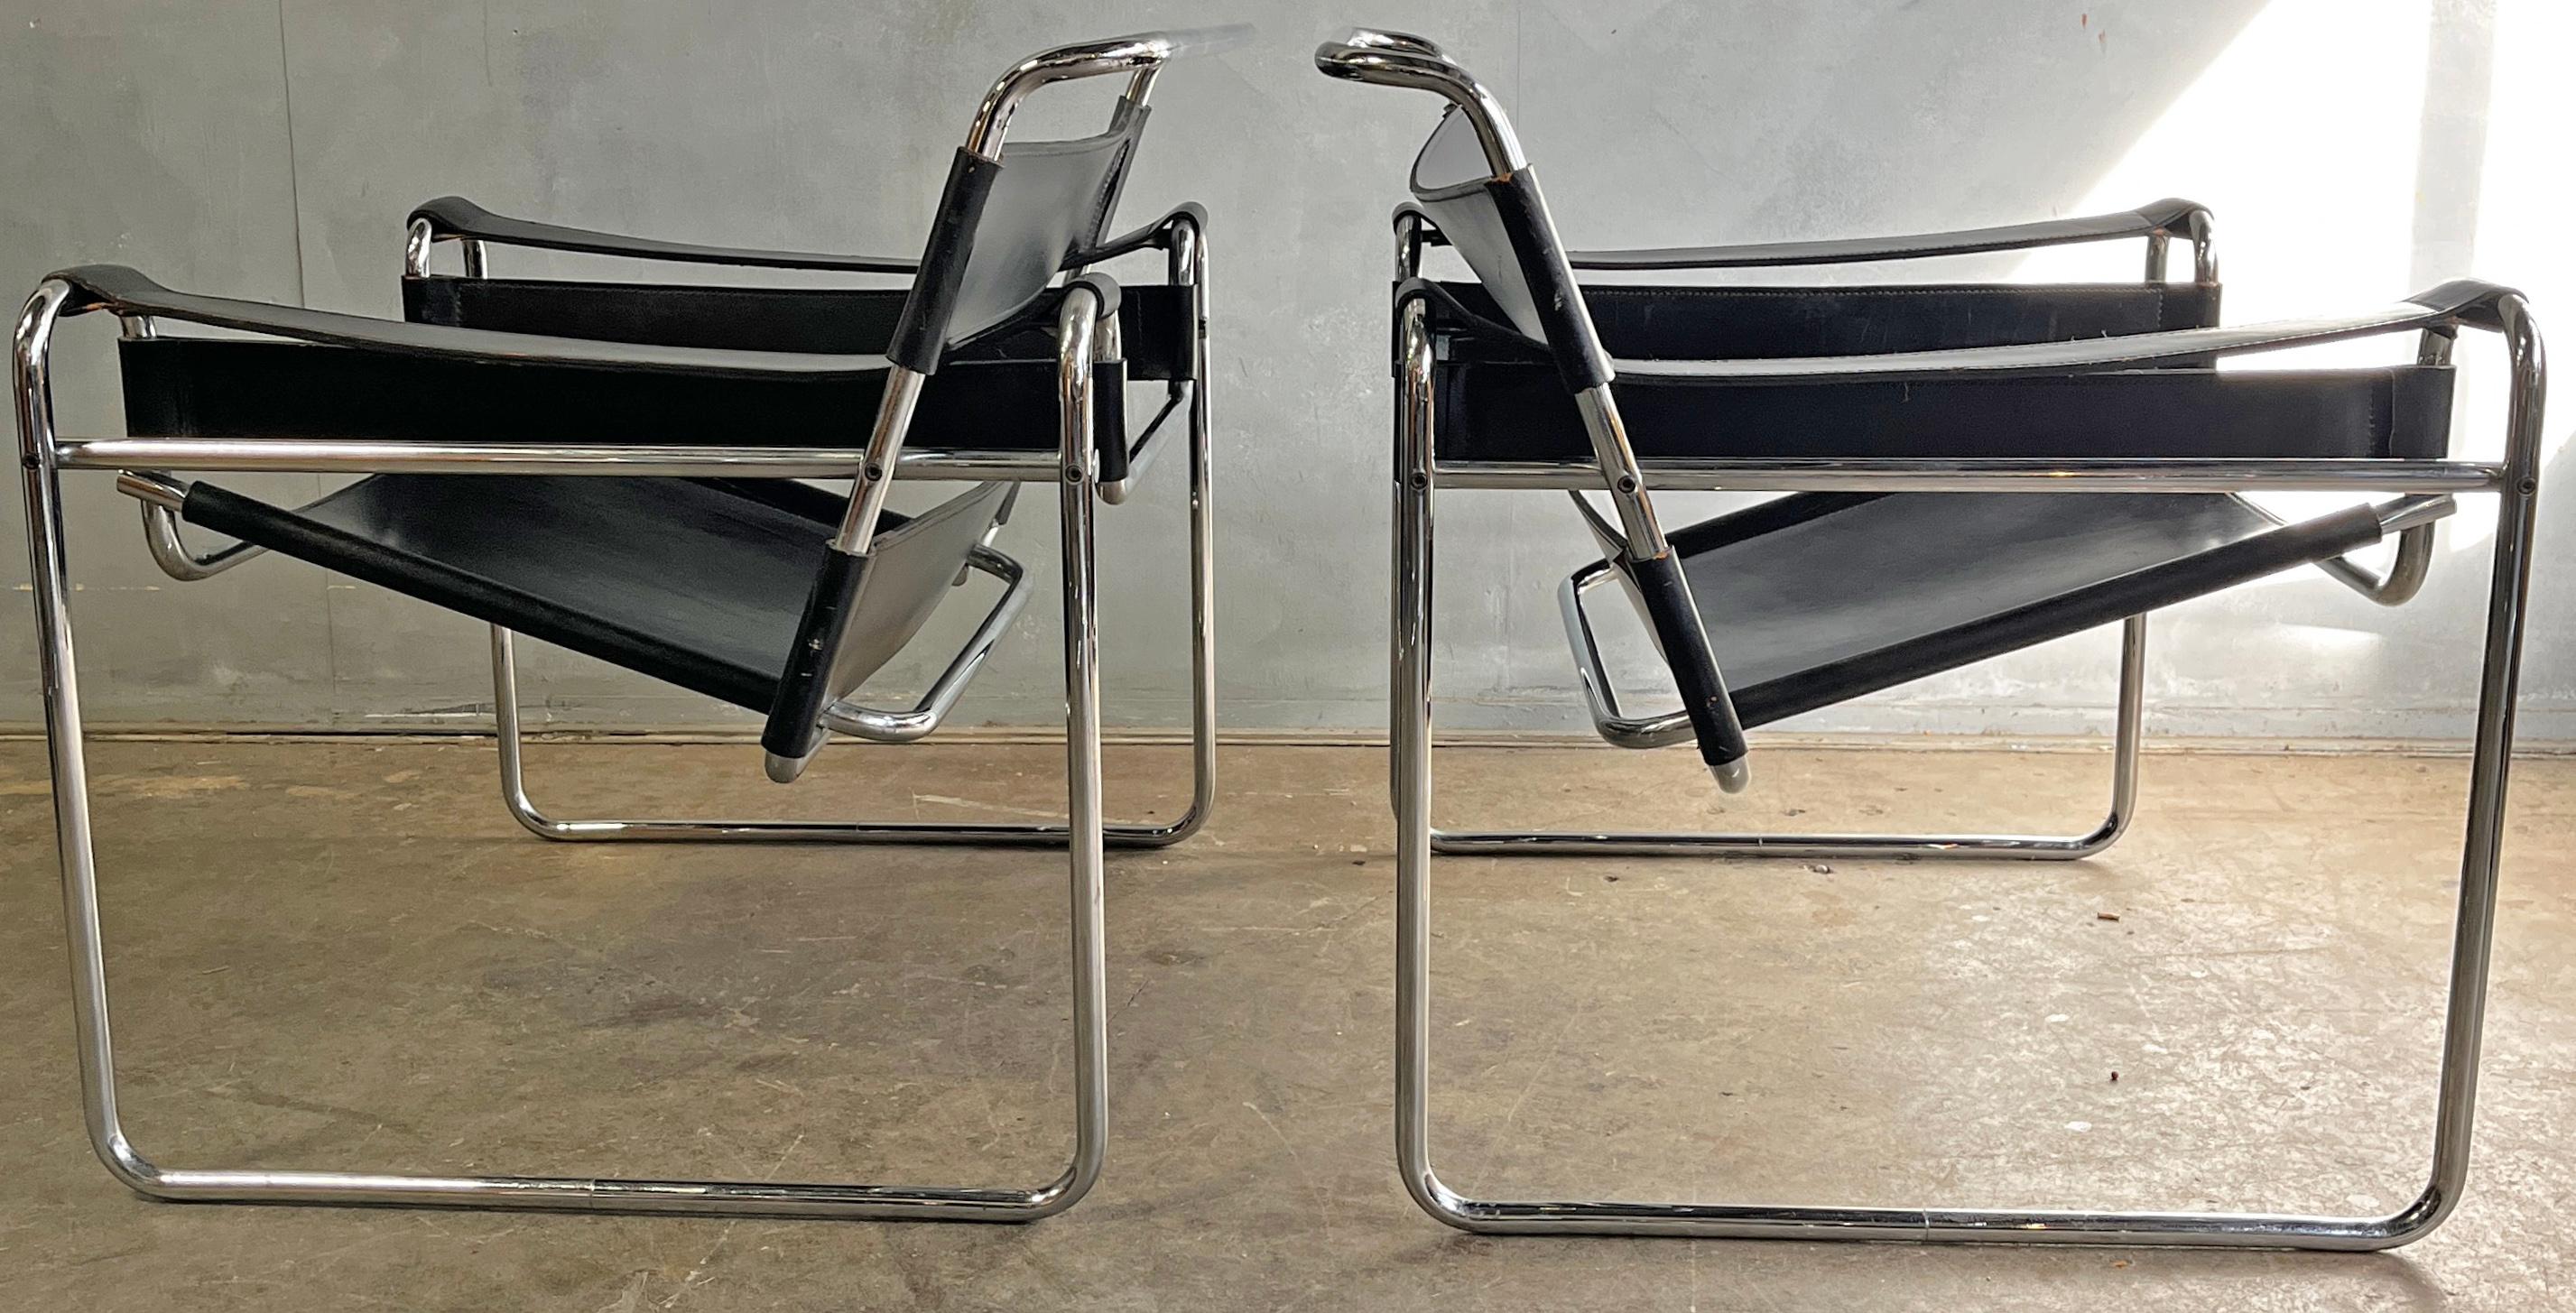 Wassily lounge chairs designed by Marcel Breuer in black full leather. This vintage pair has unique traits for authenticity verification such as flat caps on the end tubes, black hex screws, and thick cowhide leather. Bought together with the B33